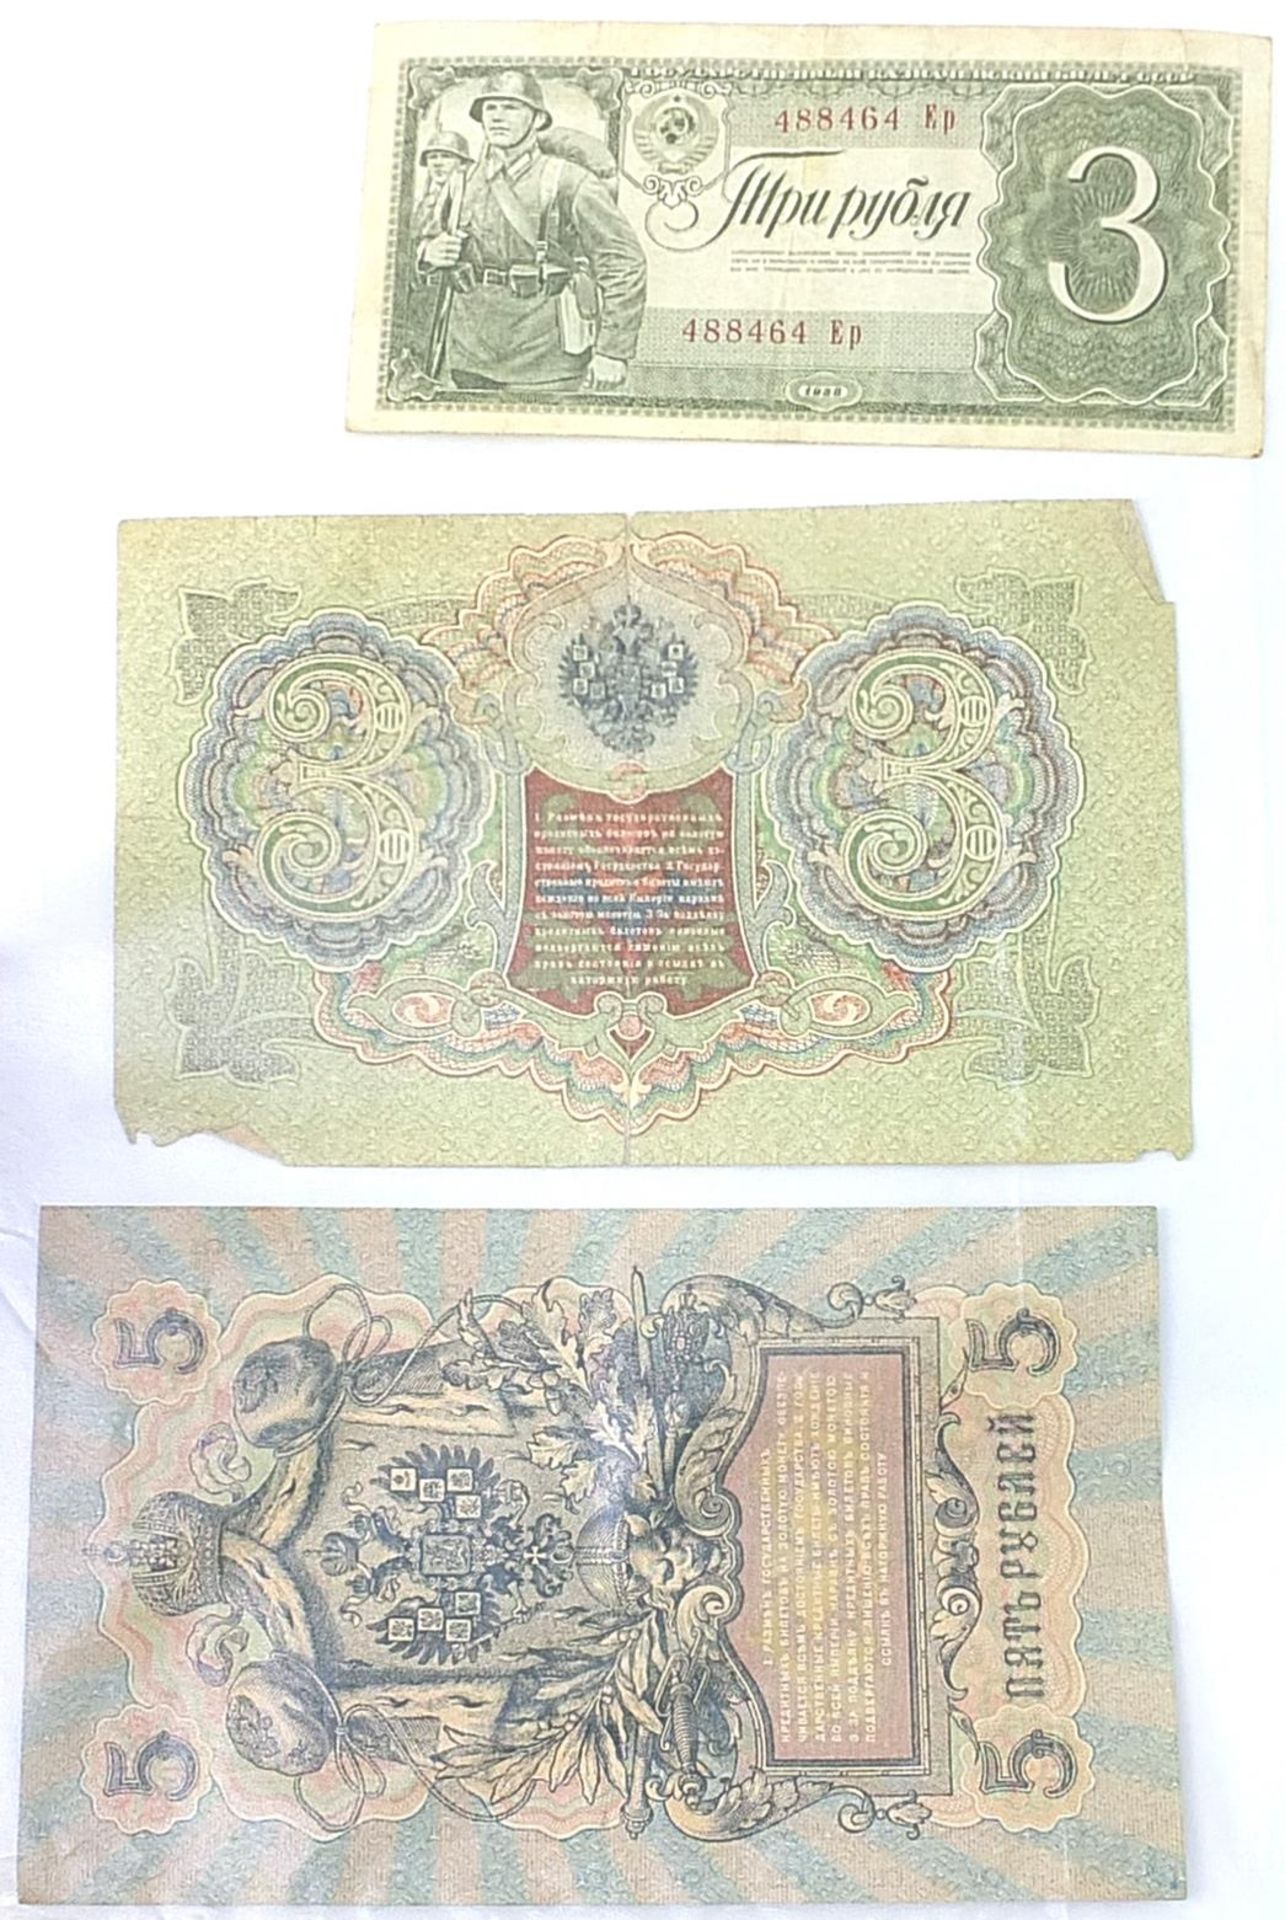 World banknotes including German and Russian examples - Image 6 of 16